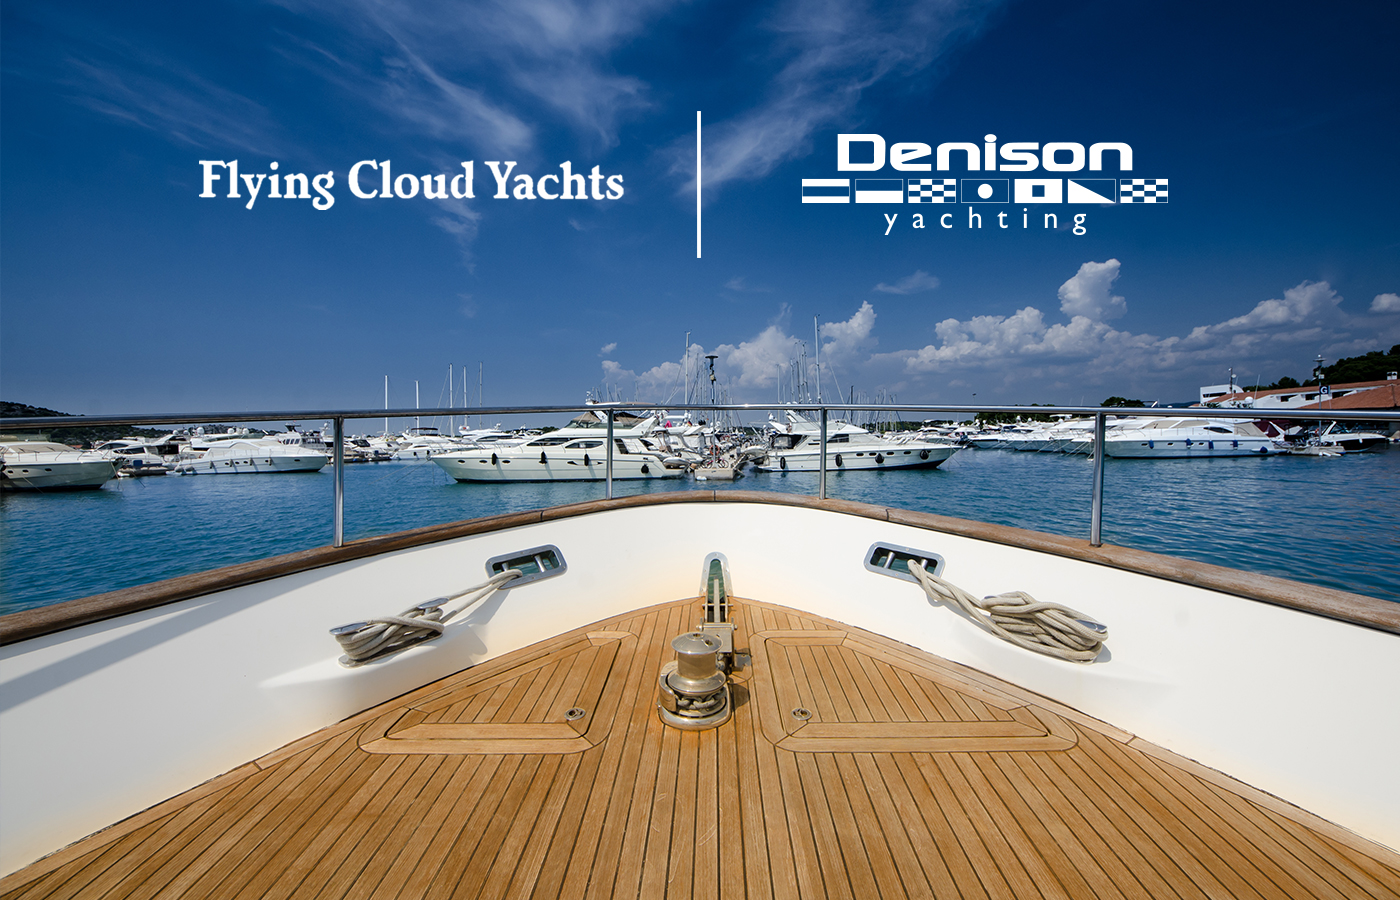 Flying Cloud Yachts + Denison Yachting